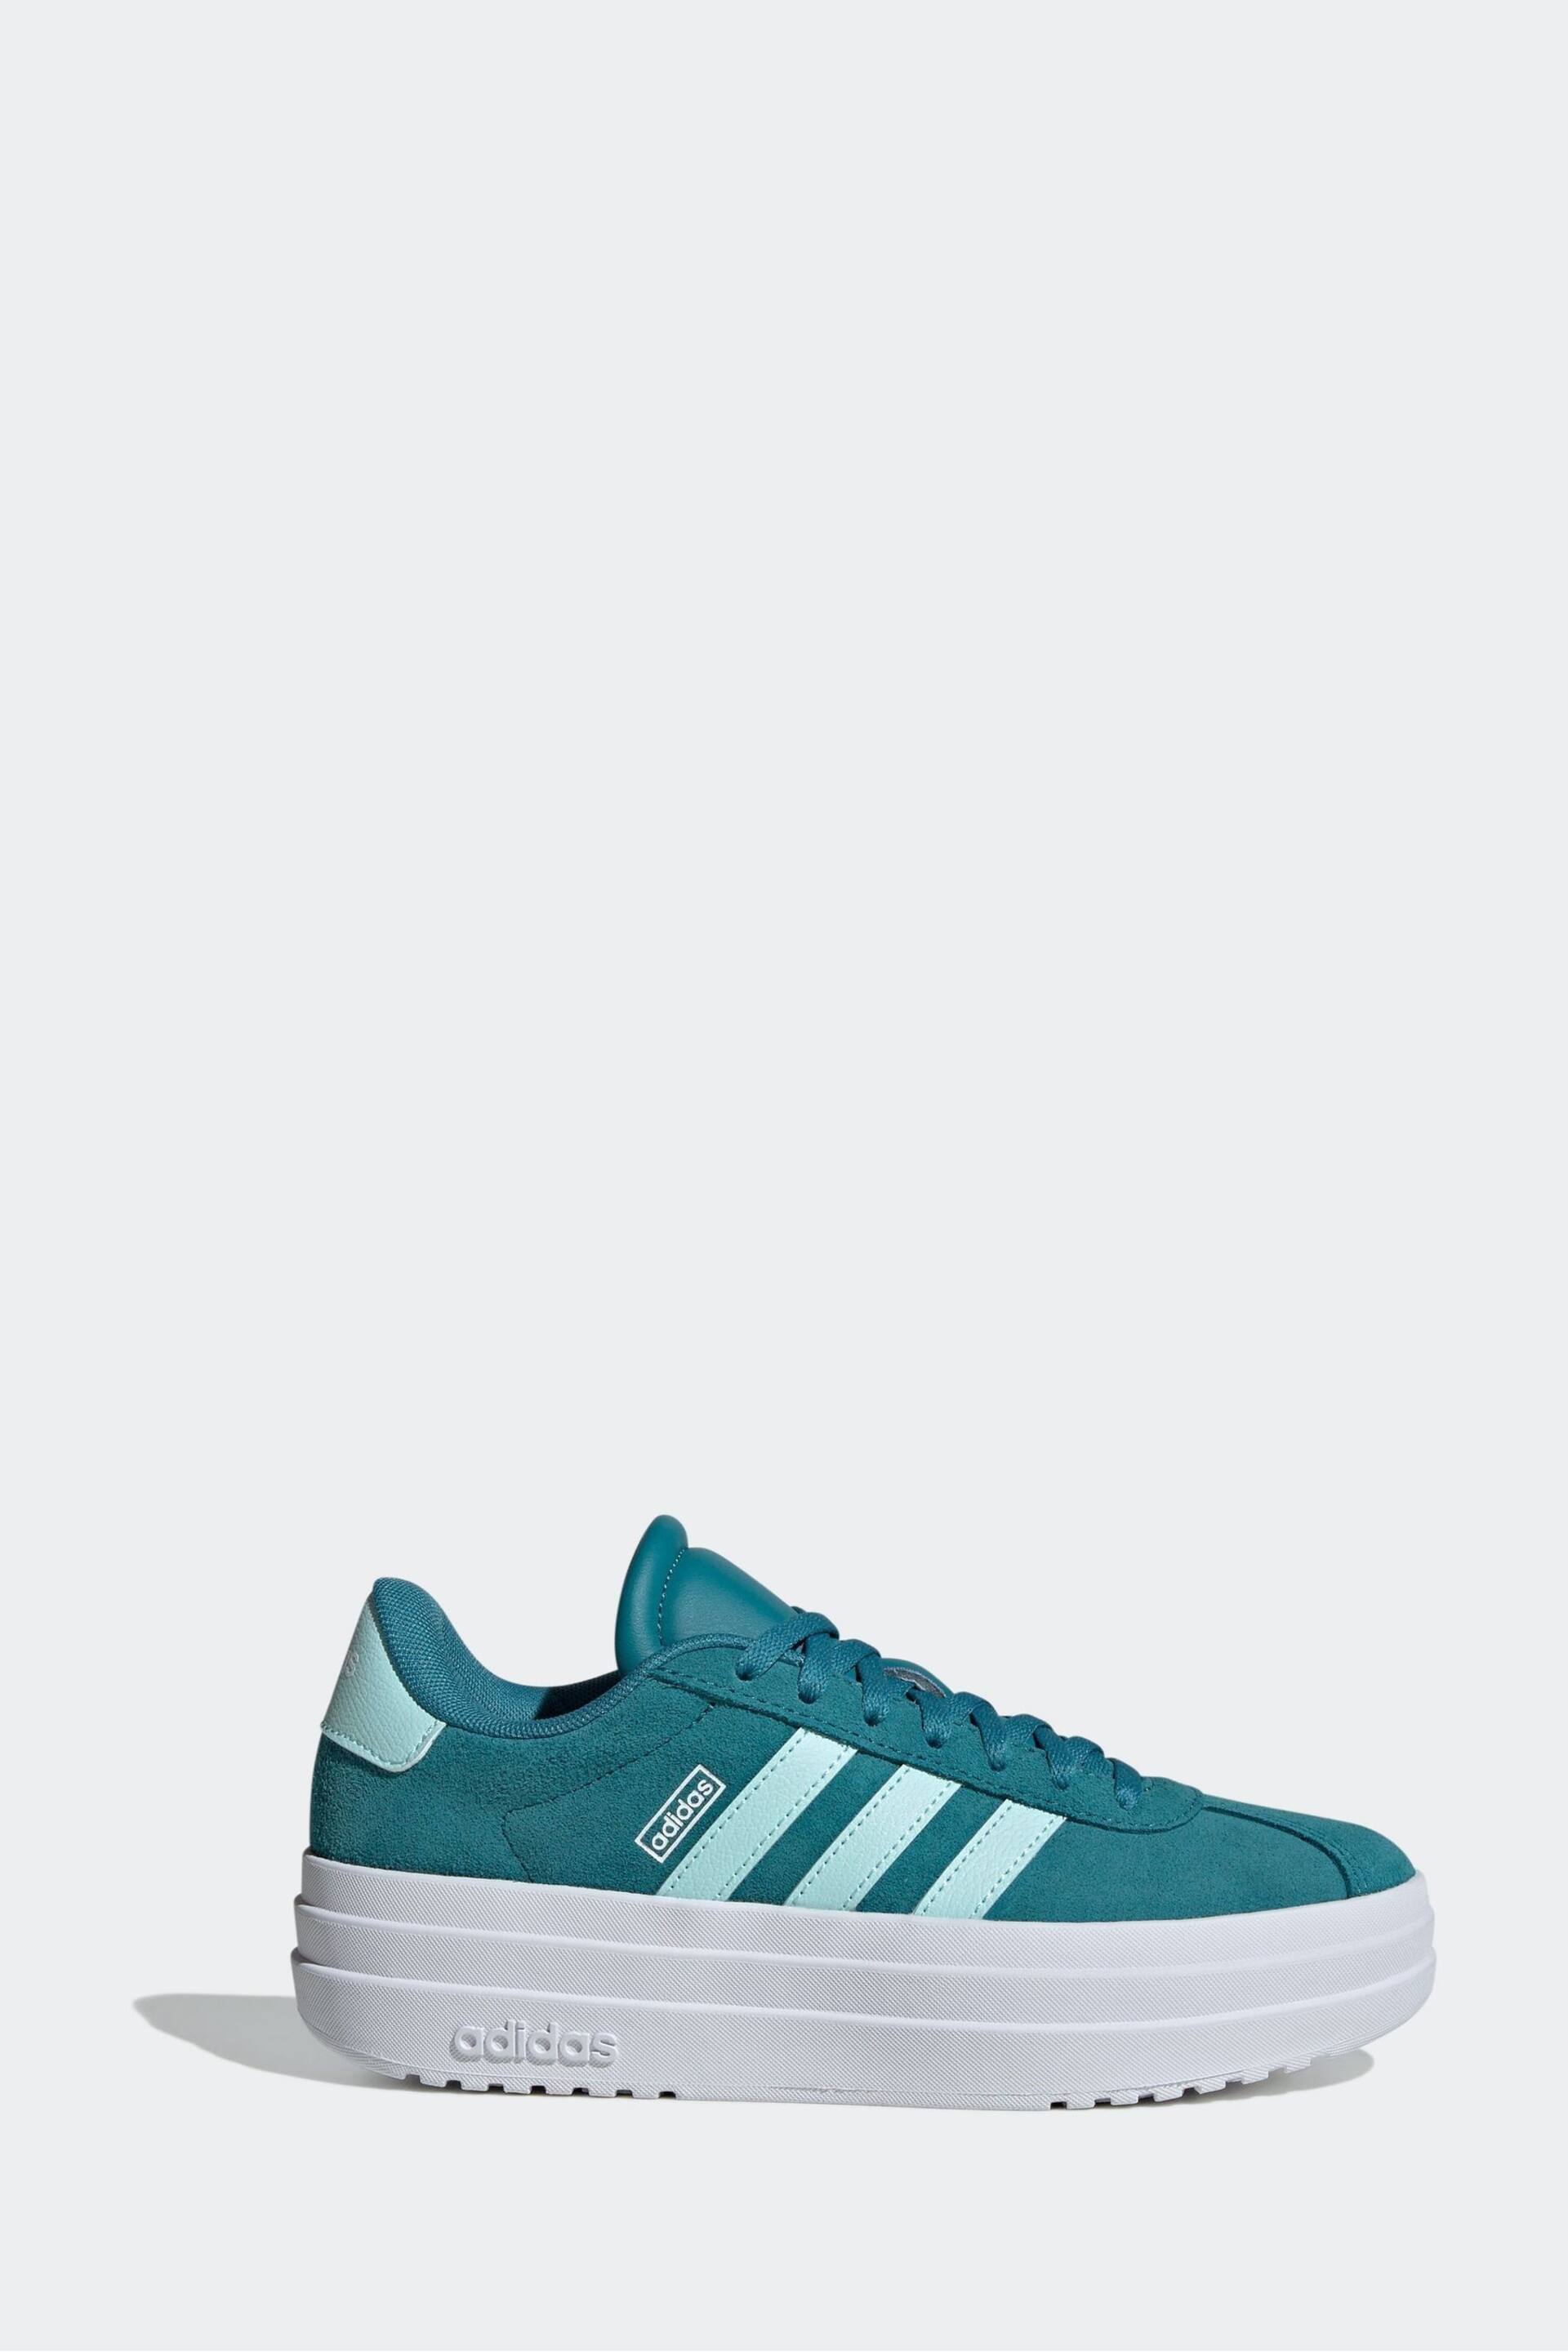 adidas Blue/White Kids VL Court Bold Trainers - Image 3 of 13